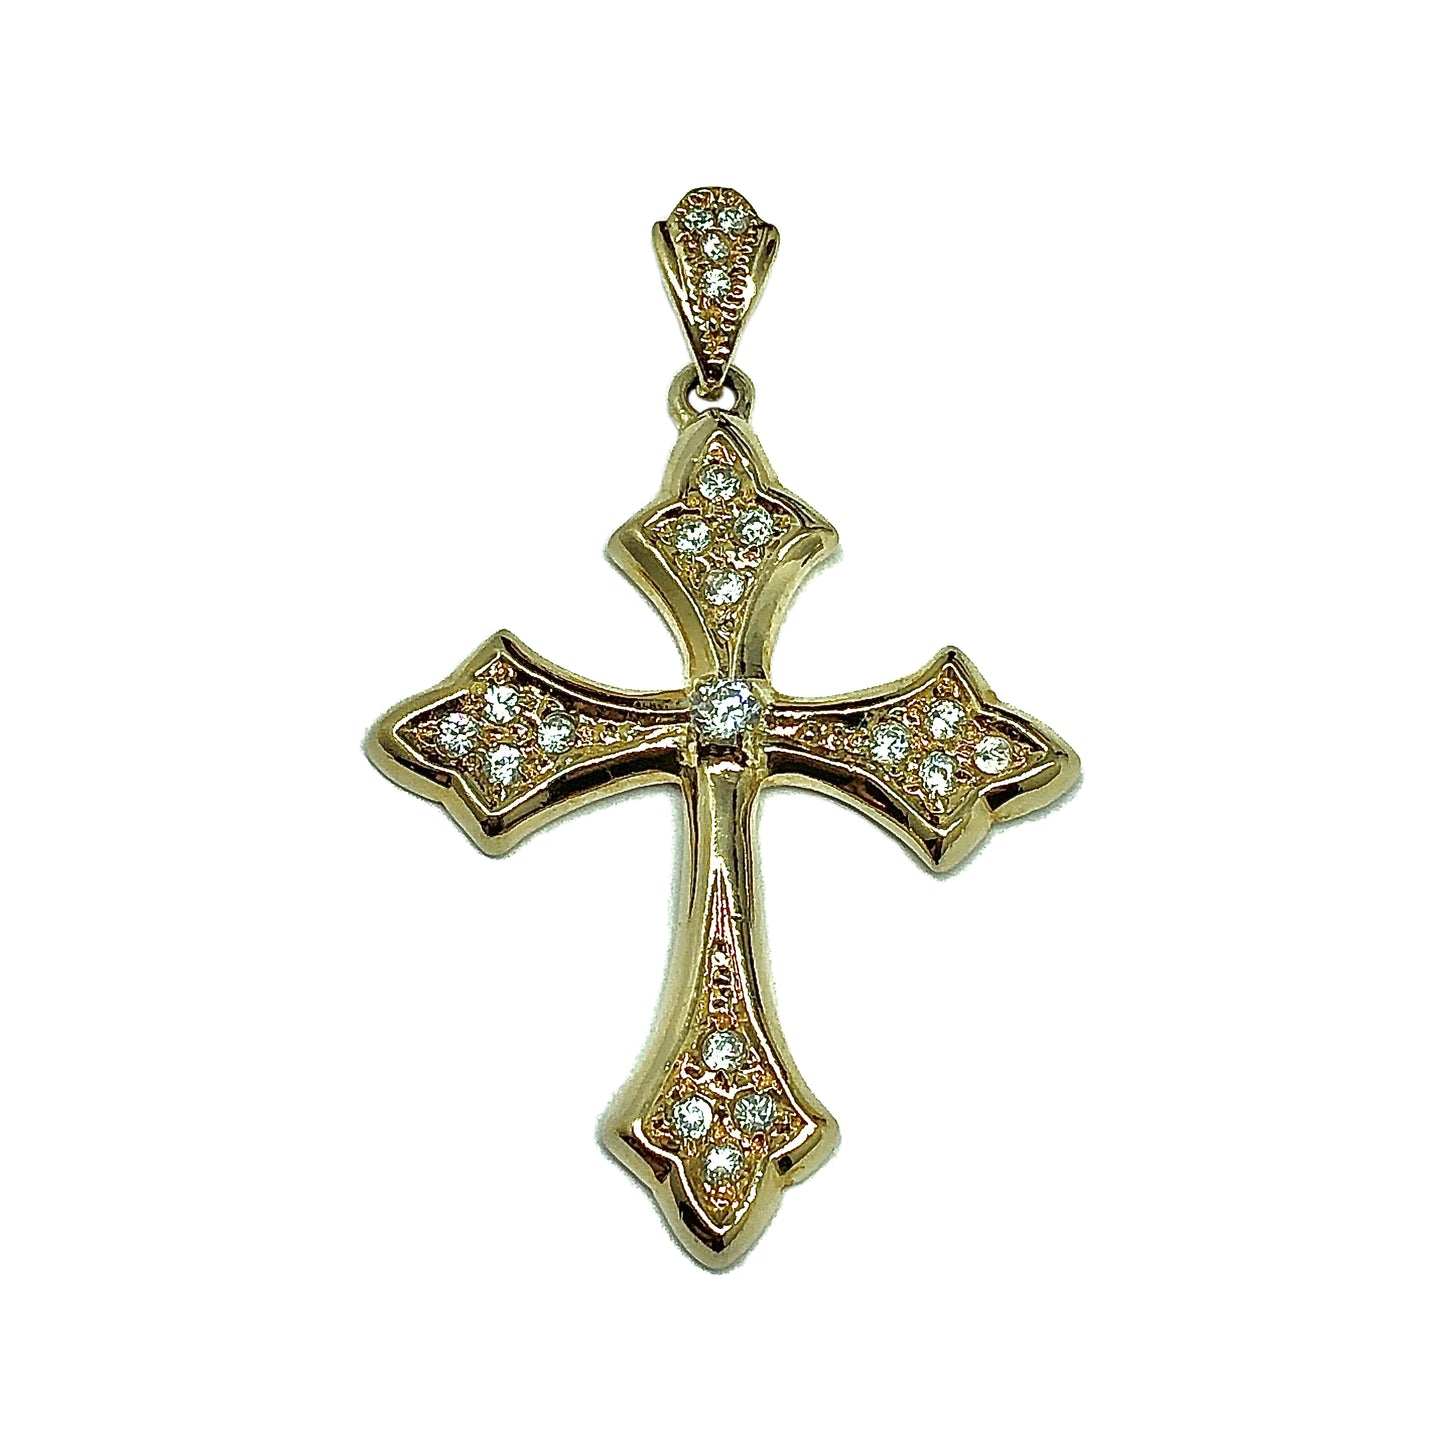 Lowest Prices Jewelry Thrift Shop | Shimmery Gold Sterling Silver Cz 2in Cross pendant | Blingschlingers